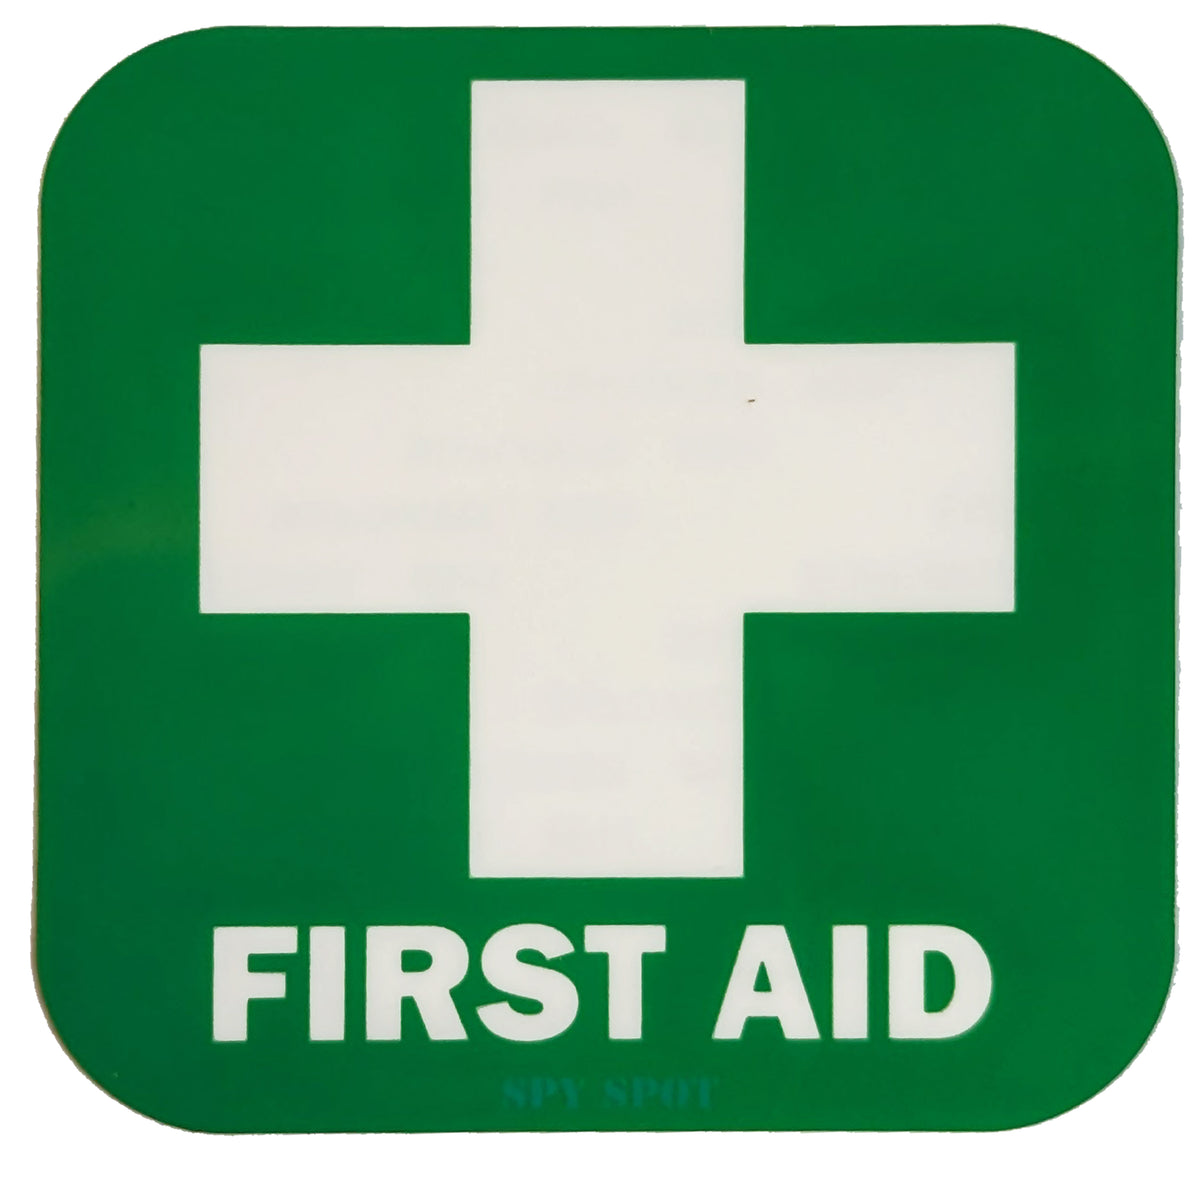 Green First Aid 4 Pack, 3.5 x 3.5 Water Resistant Heavy Duty Sickers